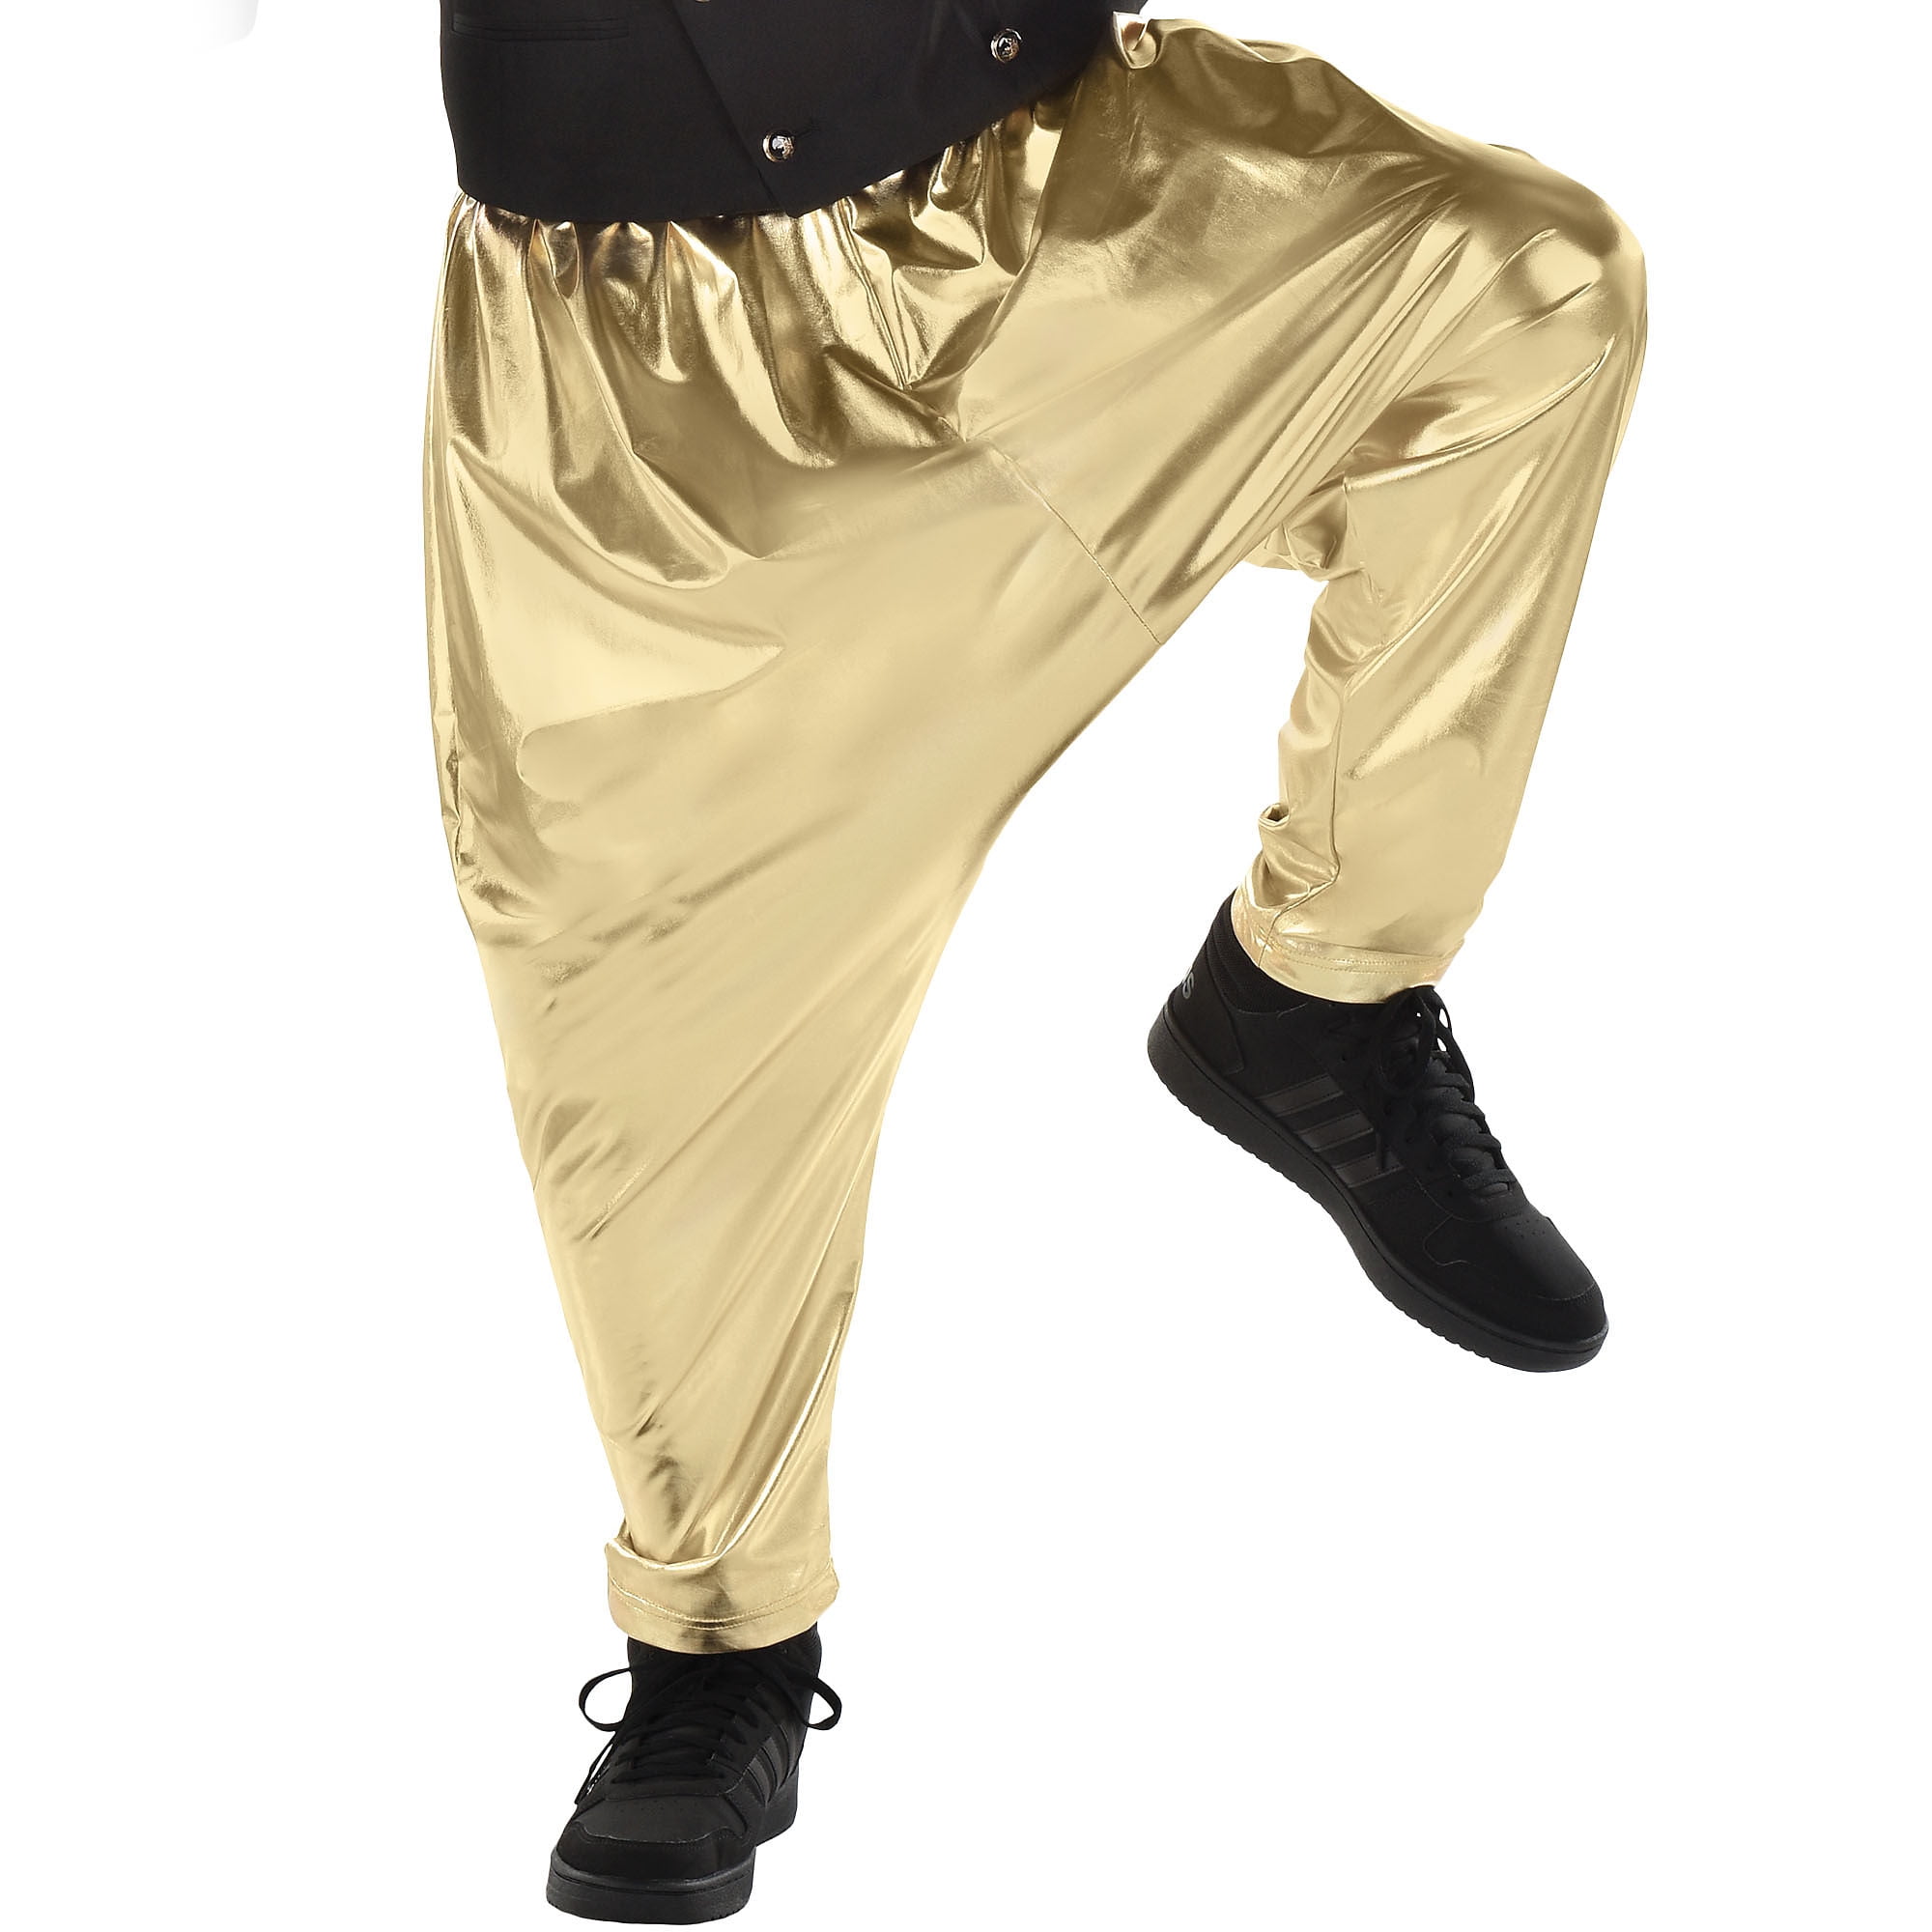 Spring Summer Fashion 2021 Gold Personality Large Cross Trousers Stage  Performance Harem Trousers Losse Hip Hop Skinny PantGold S   Amazoncombe Fashion